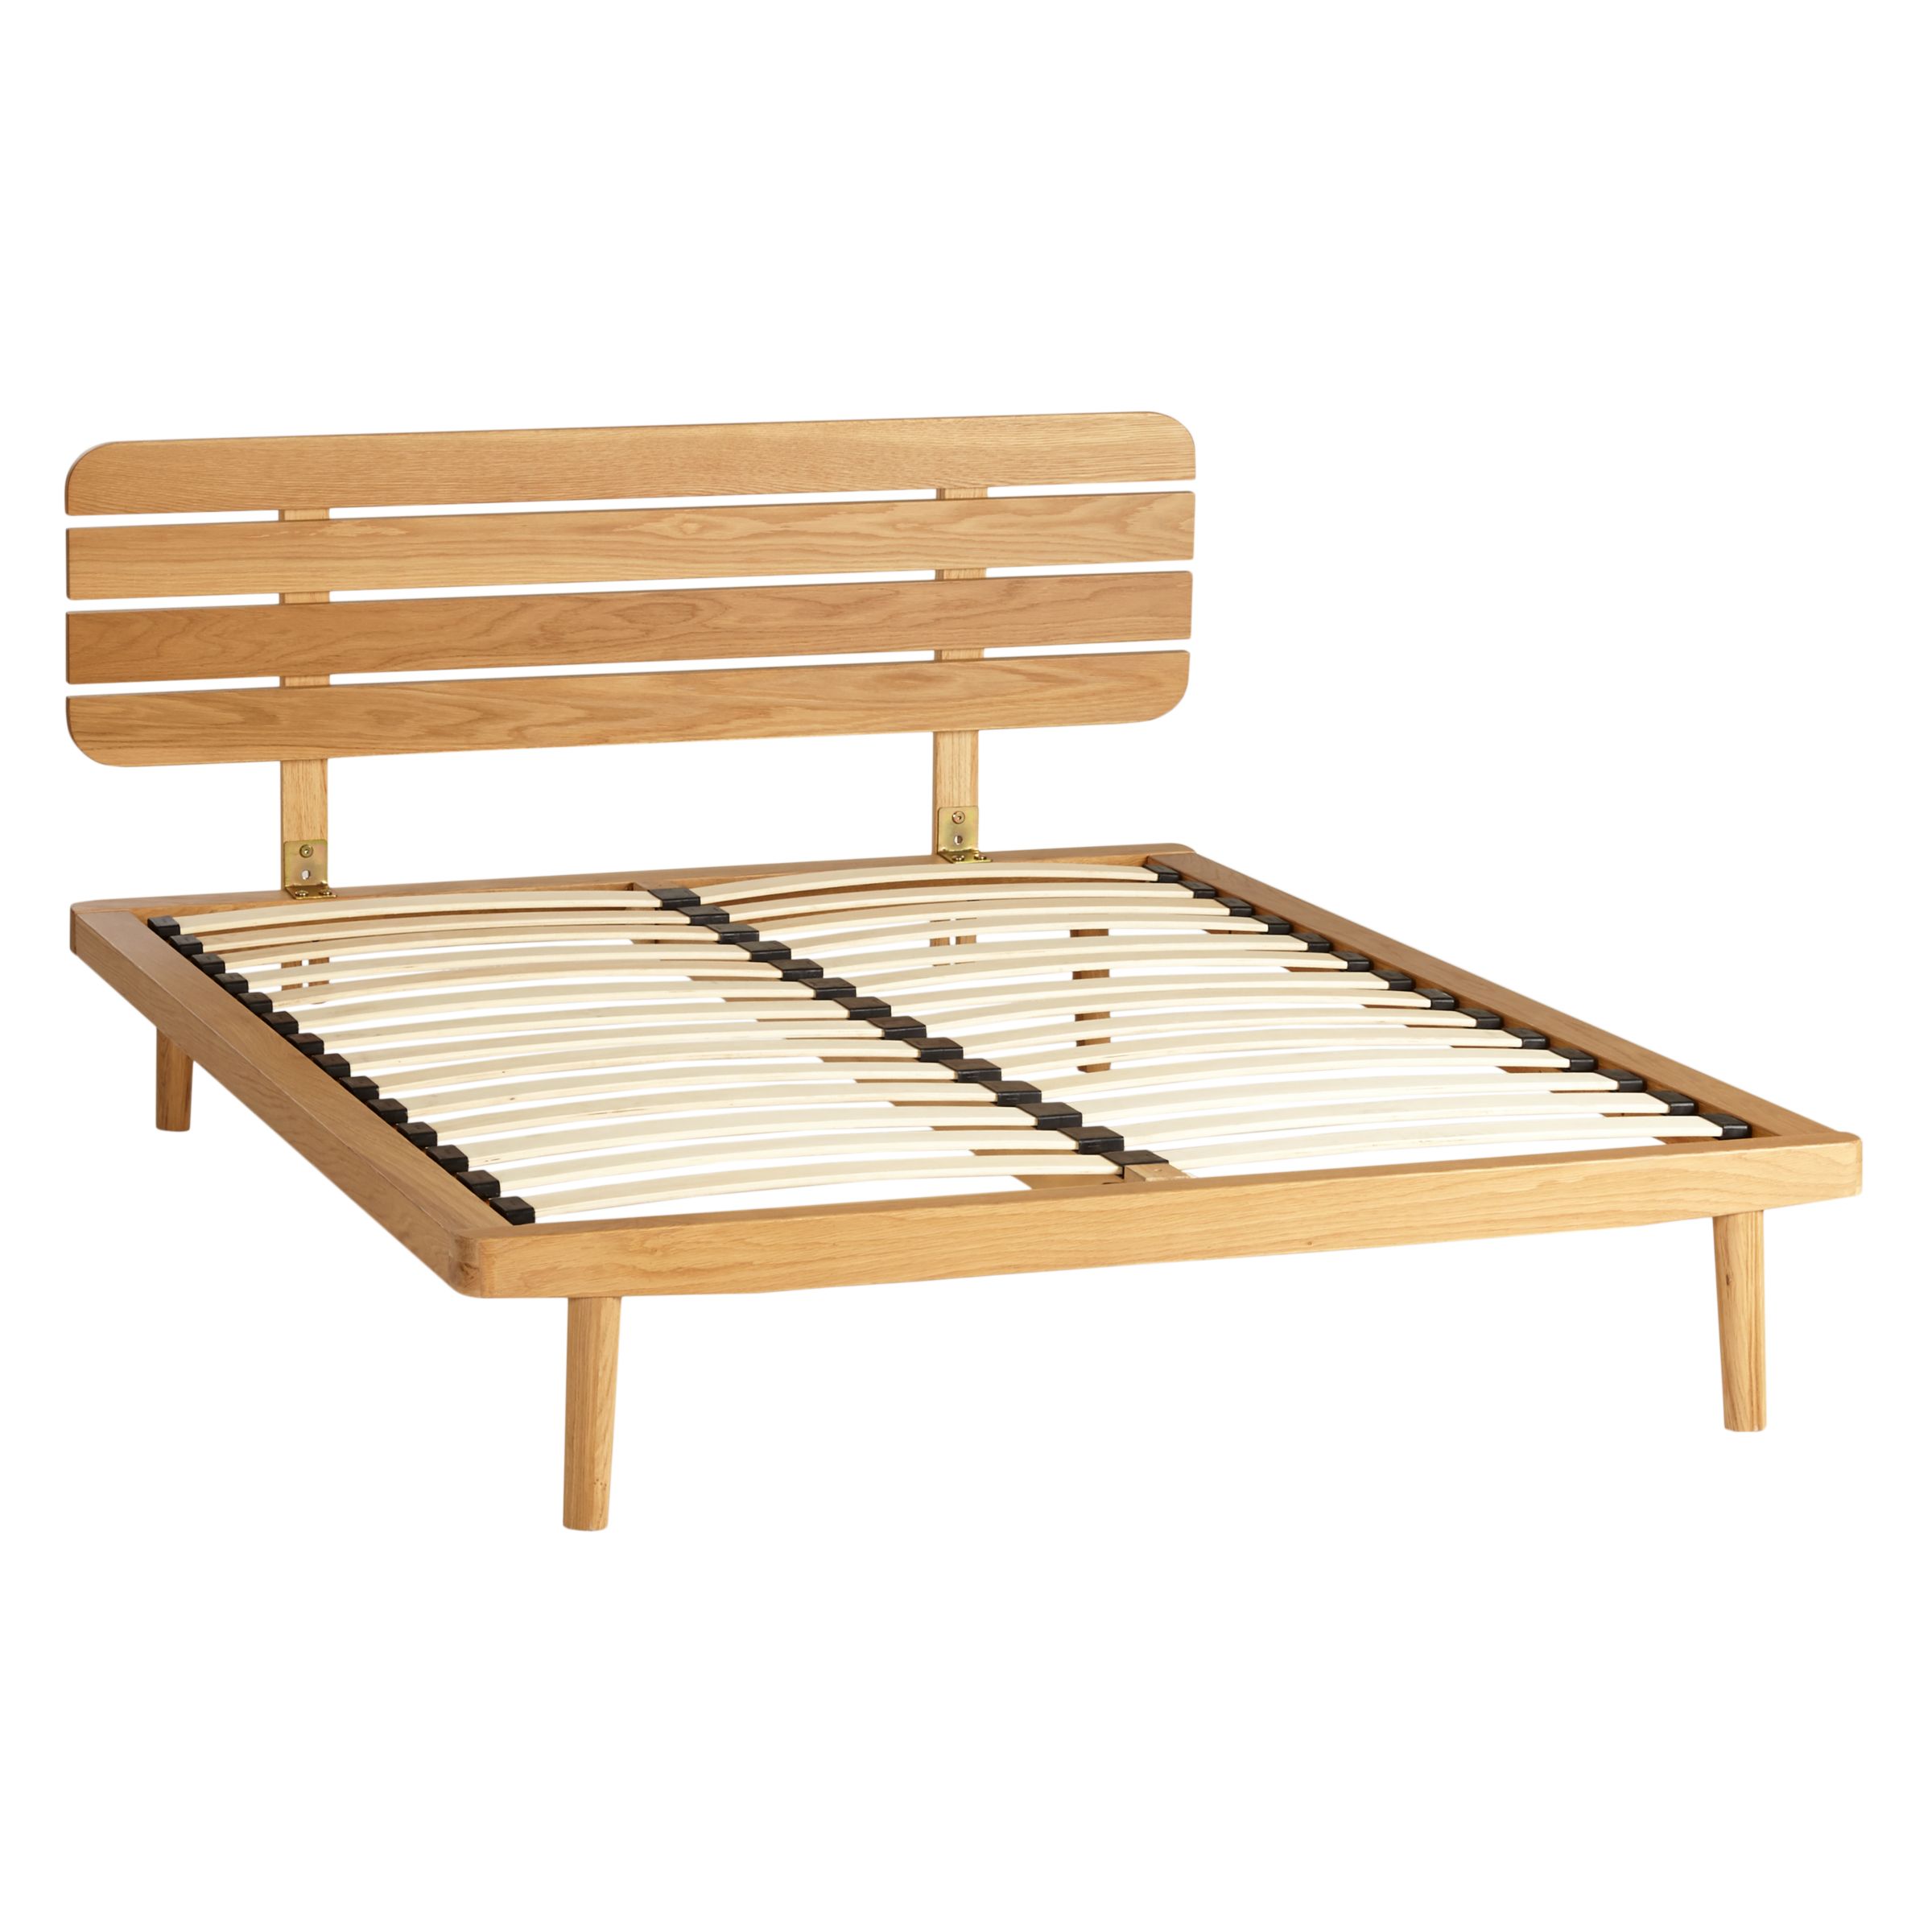 John Lewis Bow Slatted Headboard Bed Frame, Double, with Underbed Storage, Oak